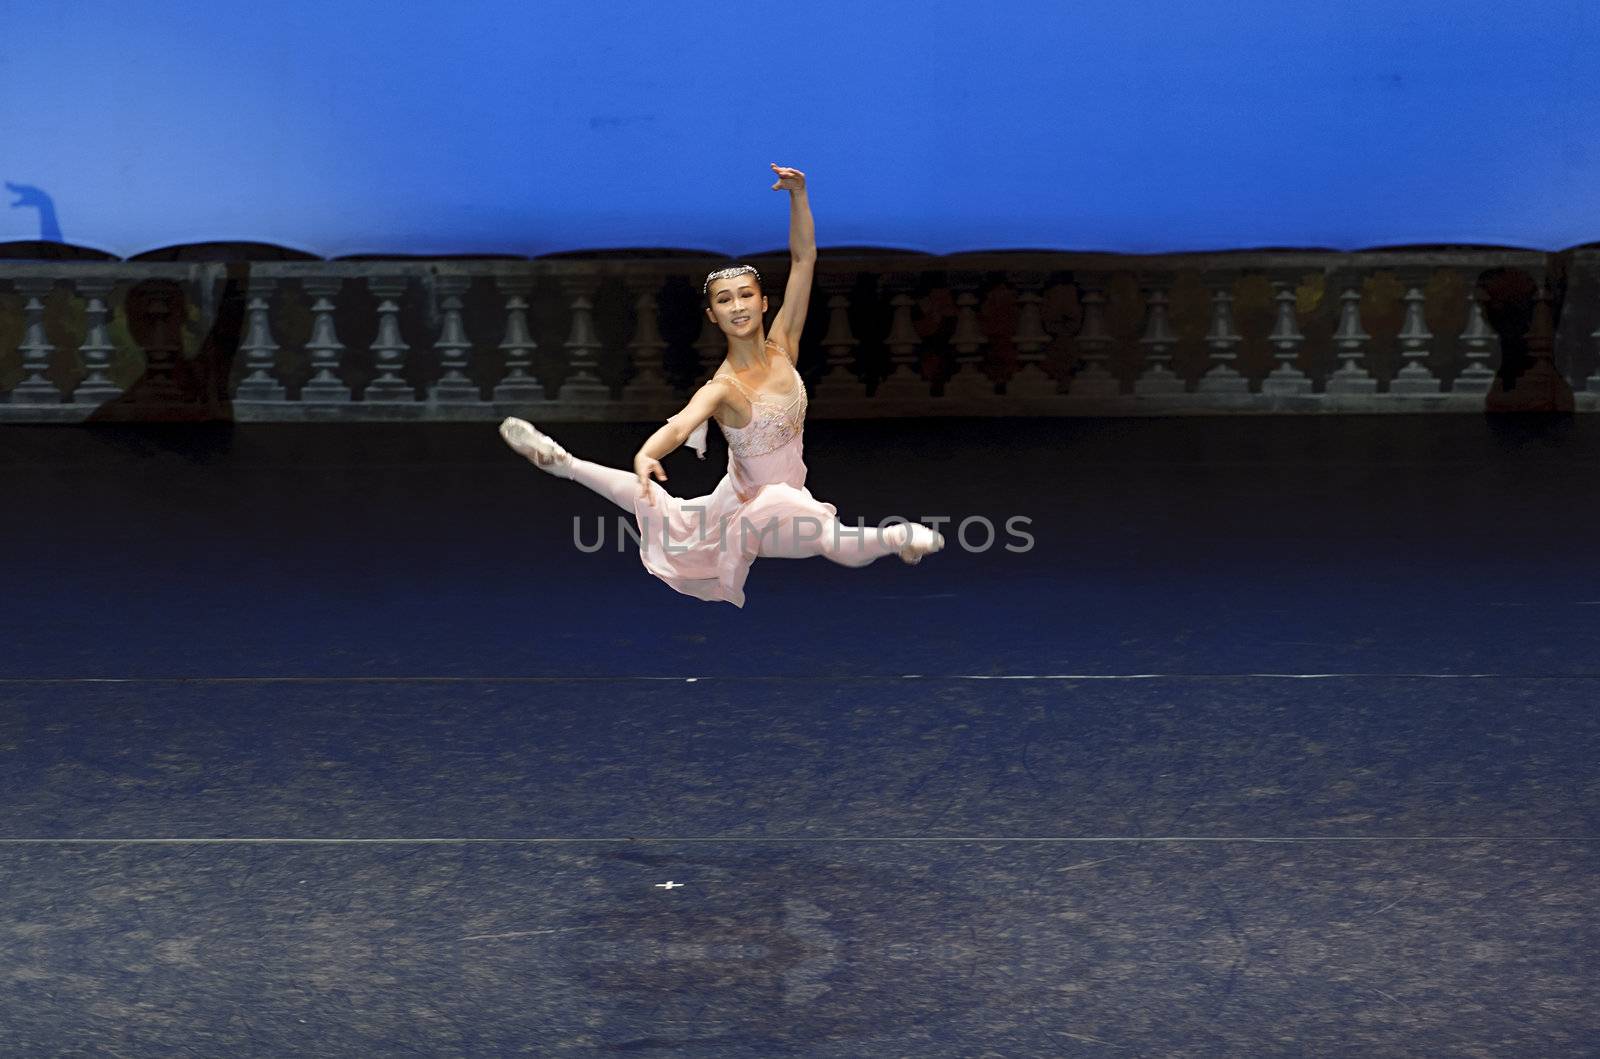 CHENGDU - JAN 5: ballerina of The national ballet of china performs on stage at Jincheng theater.Jan 5, 2012 in Chengdu, China.
